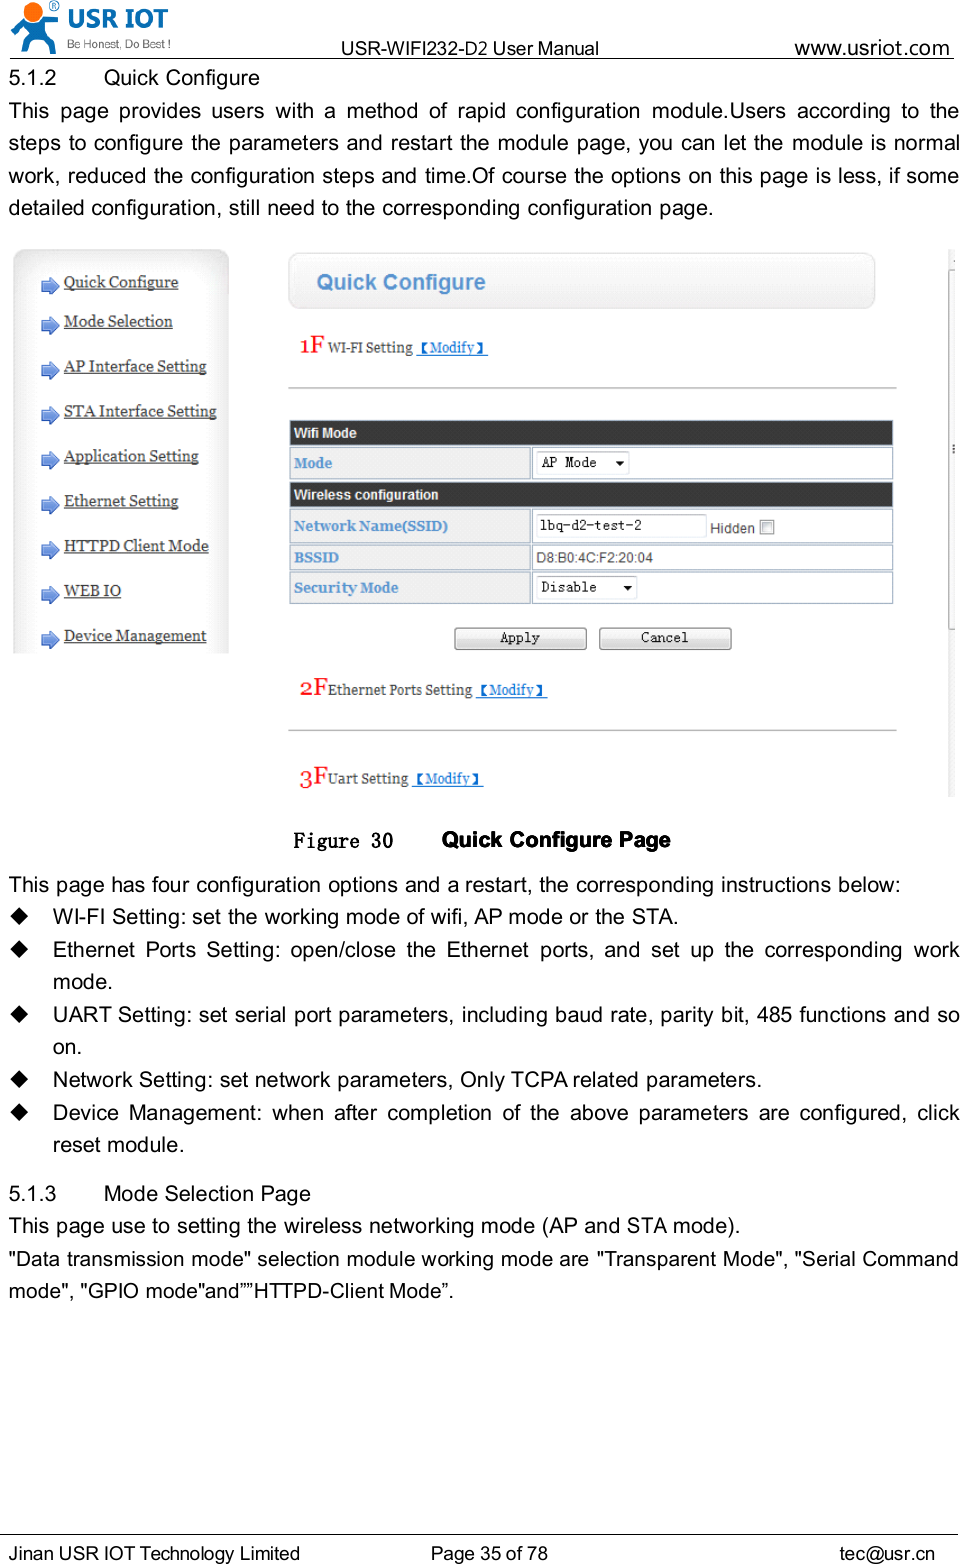 USR-WIFI232- D2 User Manual www.usr iot .comJinan USR IOT Technology Limited Page 35 of 78 tec@usr.cn5.1.2 Quick ConfigureThis page provides users with a method of rapid configuration module.Users according to thesteps to configure the parameters and restart the module page, you can let the module is normalwork, reduced the configuration steps and time.Of course the options on this page is less, if somedetailed configuration, still need to the corresponding configuration page.Figure 30 QuickQuickQuickQuick ConfigureConfigureConfigureConfigure PagePagePagePageThis page has four configuration options and a restart, the corresponding instructions below:WI-FI Setting: set the working mode of wifi, AP mode or the STA.Ethernet Ports Setting: open/close the Ethernet ports, and set up the corresponding workmode.UART Setting: set serial port parameters, including baud rate, parity bit, 485 functions and soon.Network Setting: set network parameters, Only TCPA related parameters.Device Management: when after completion of the above parameters are configured, clickreset module.5.1.3 Mode Selection PageThis page use to setting the wireless networking mode (AP andSTAmode).&quot;Data transmission mode&quot; selection module working mode are &quot;Transparent Mode&quot;, &quot;Serial Commandmode&quot;, &quot;GPIO mode&quot; and ”” HTTPD-Client Mode ” .